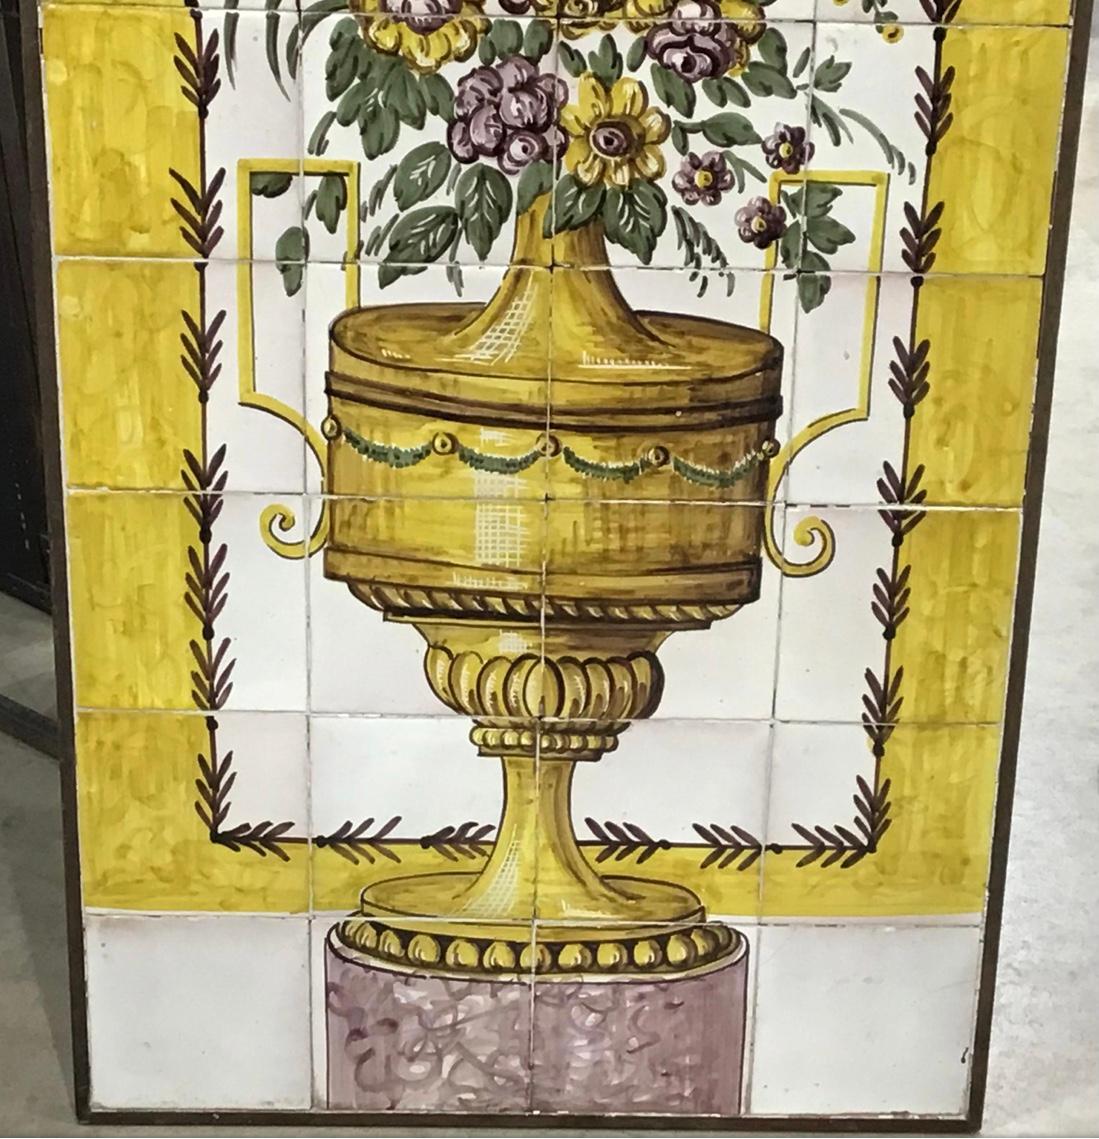 A set of framed hand painted tiles. Probably Spanish or Italian. Hand painted showing an urn on a pedestal with a bouquet of flowers. Mounted in a wood frame with heavy wire for hanging.